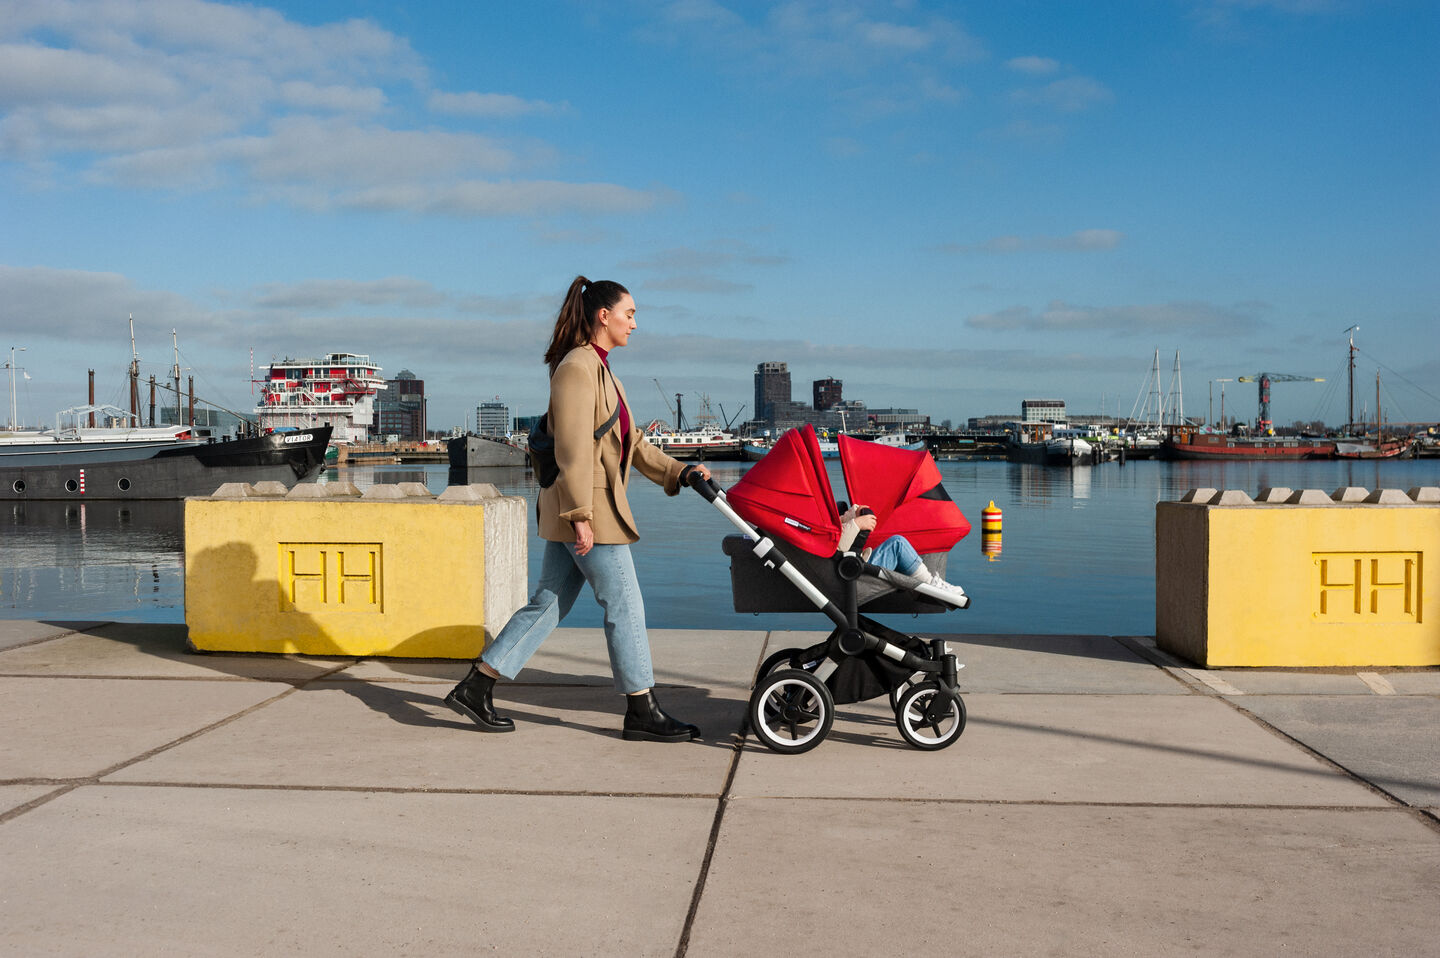 What's new: Bugaboo Fox 2 and Bugaboo Donkey 3